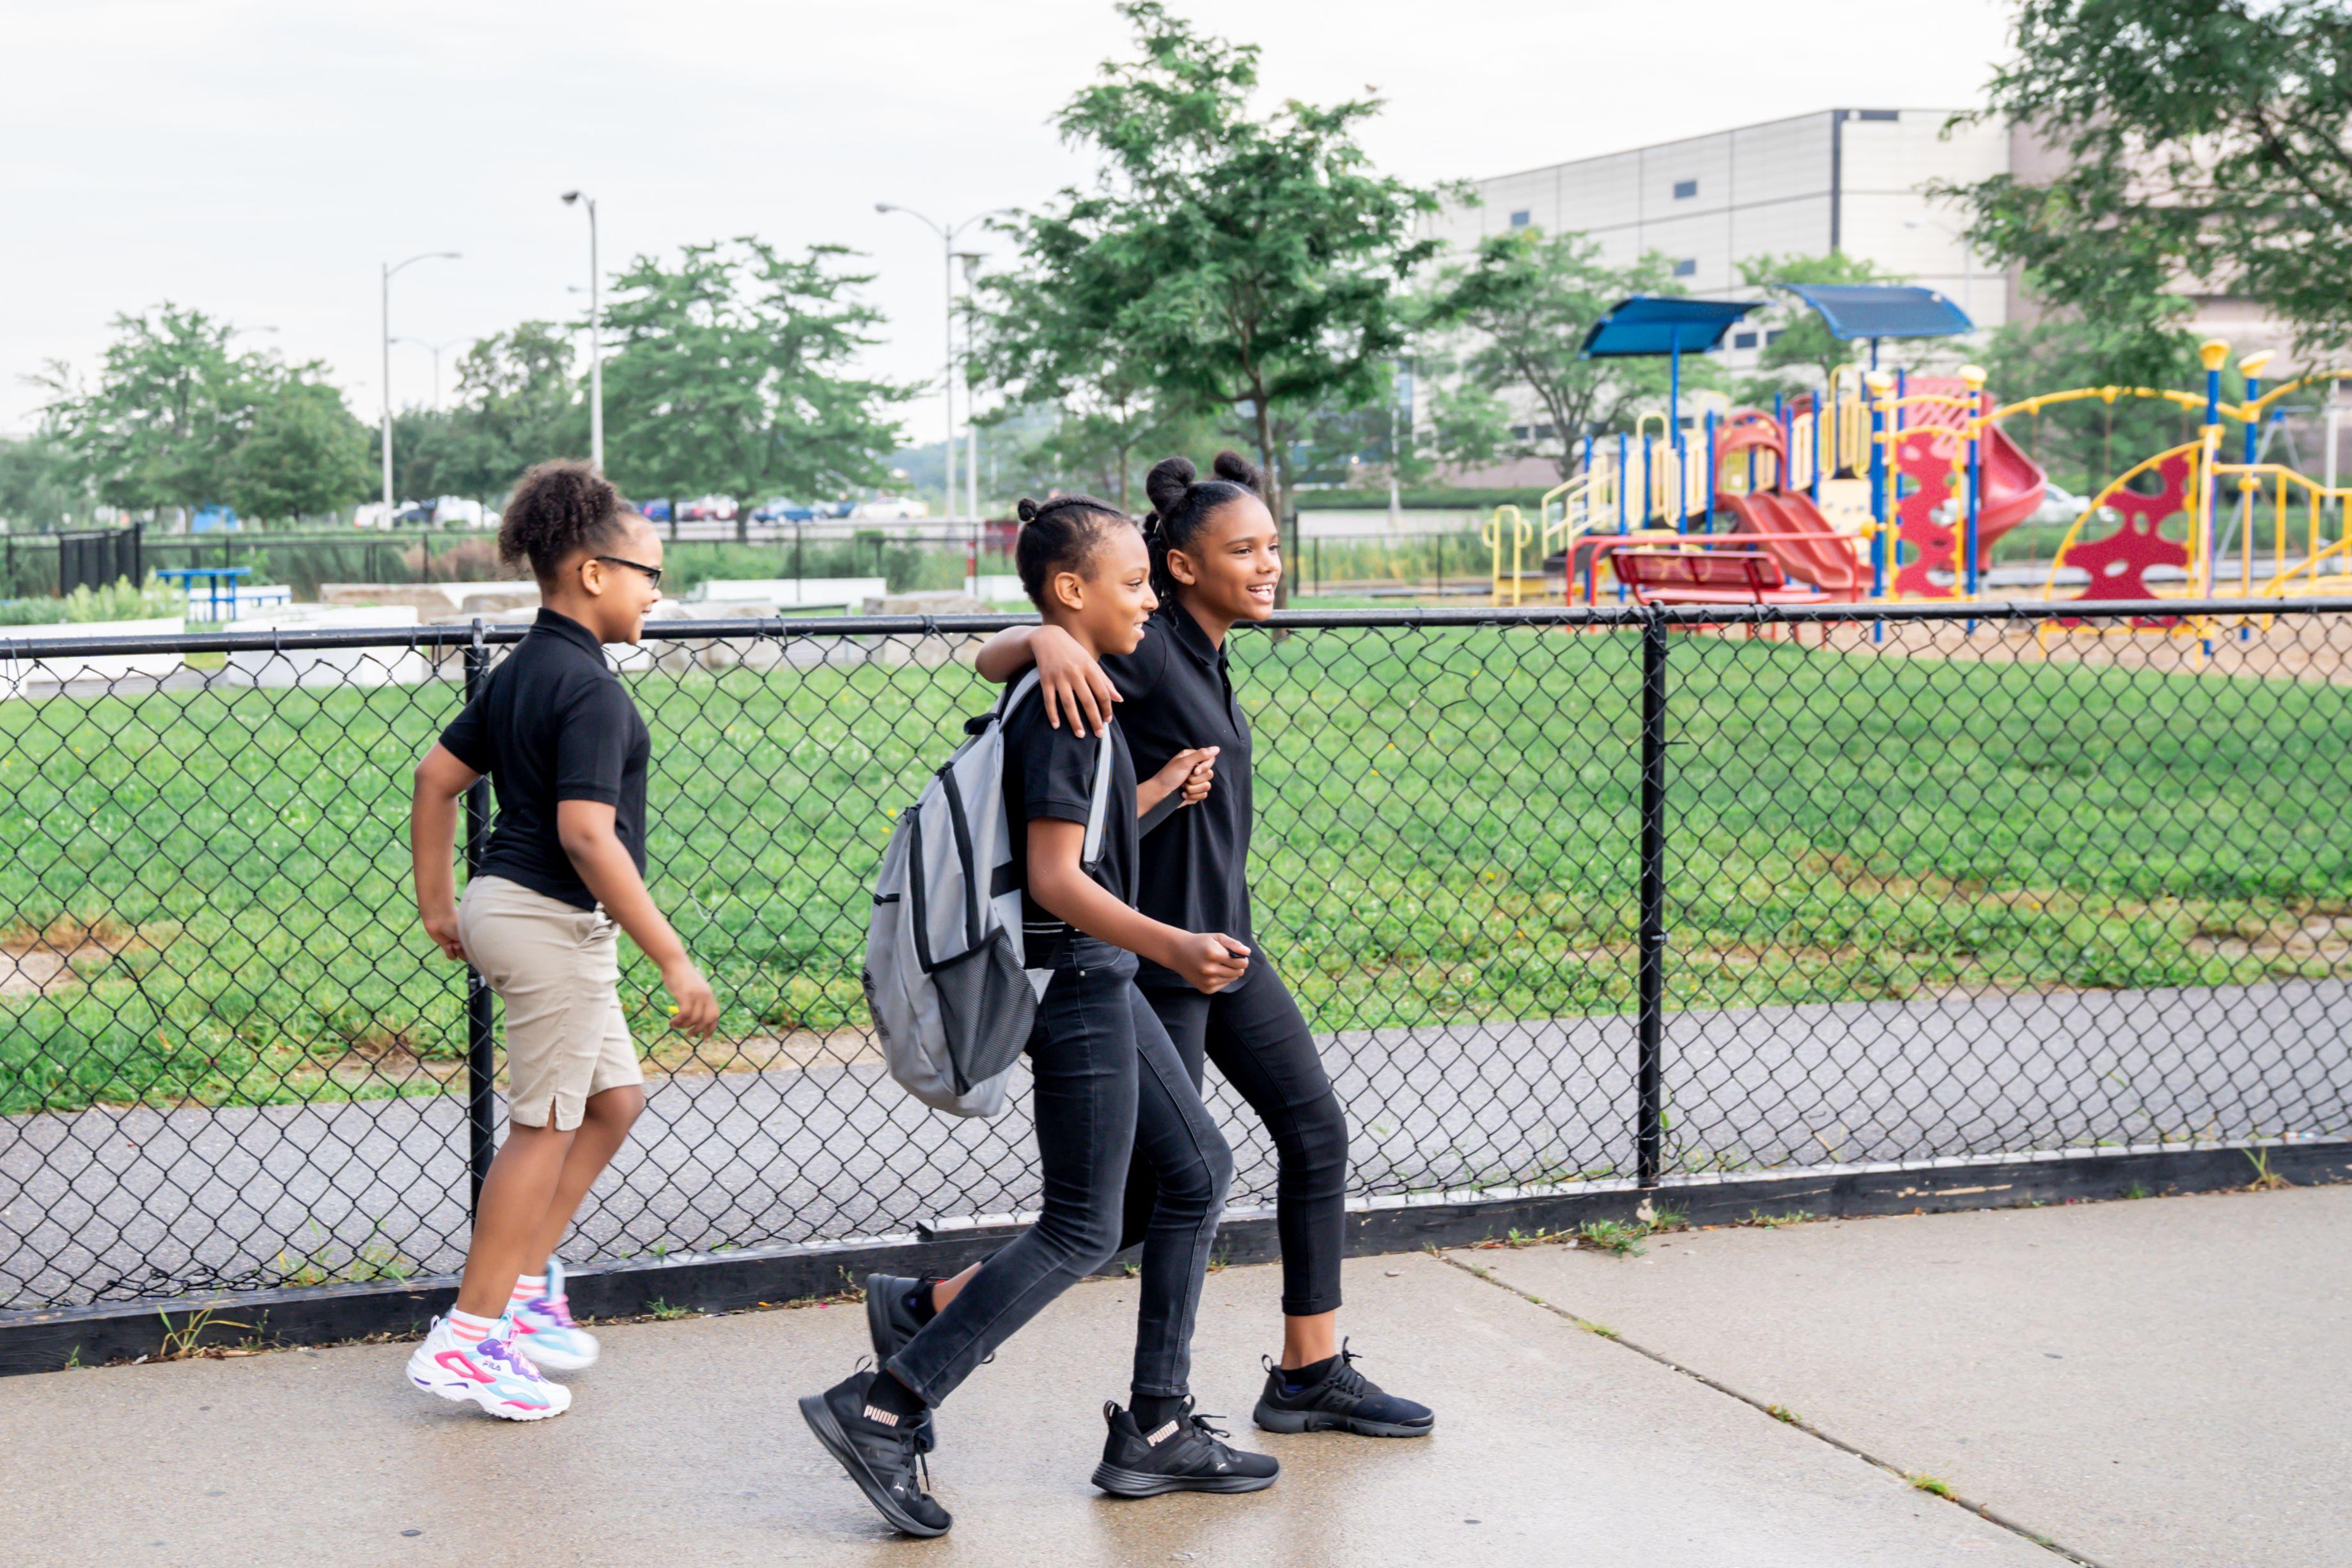 Outside PACE Academy, two students walk together smiling on a sidewalk near the colorful playground while another follows right behind.